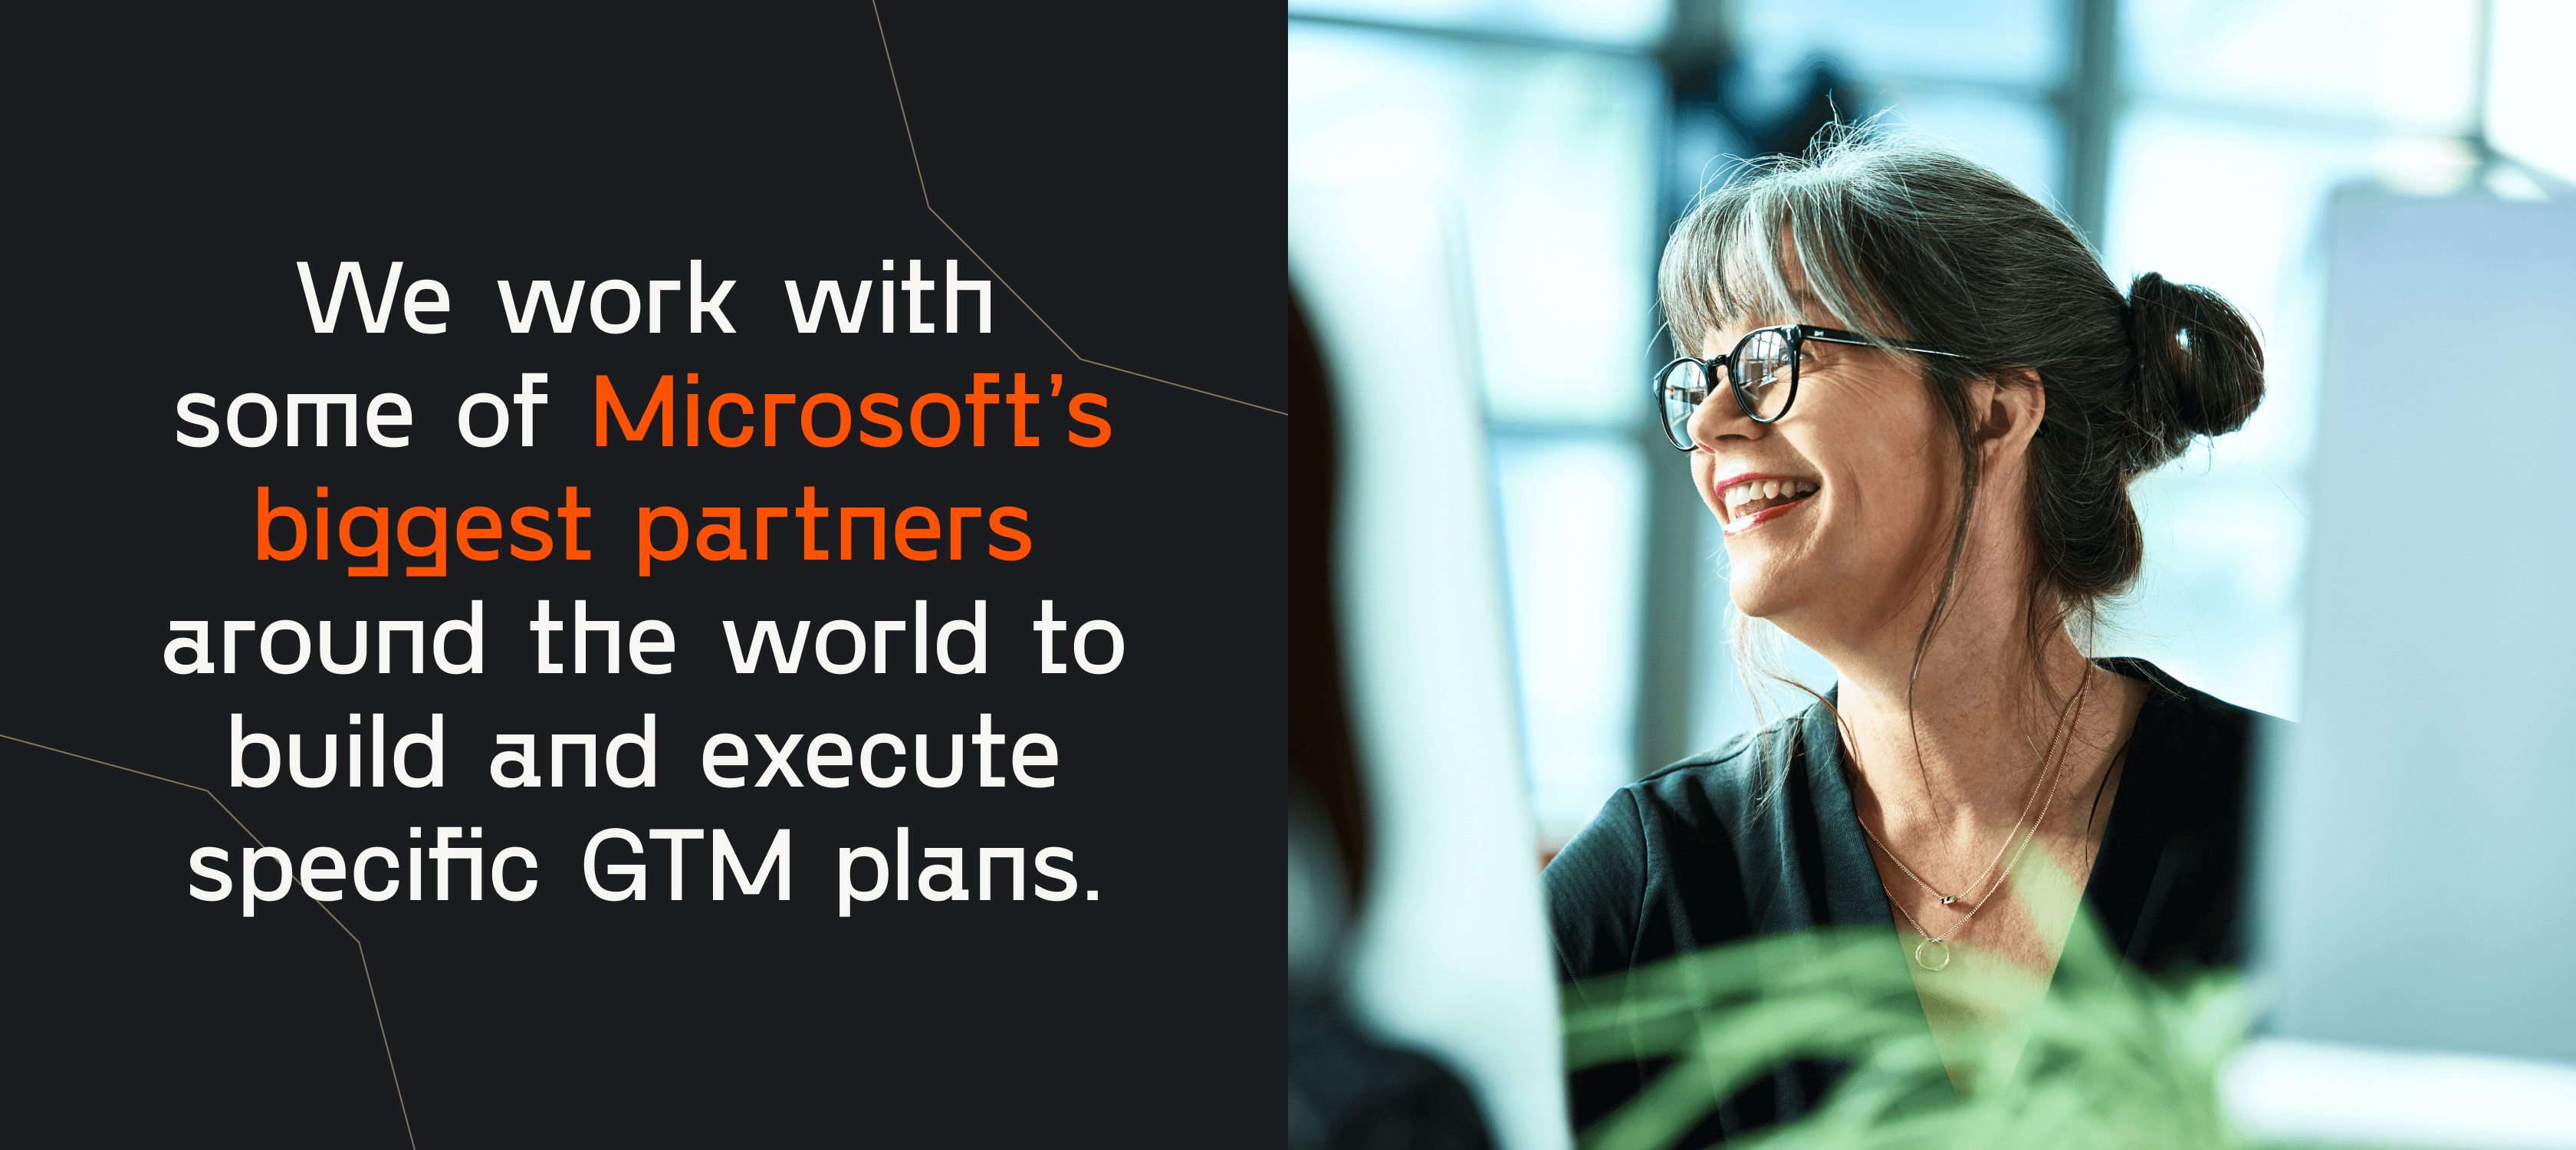 We work with some of Microsoft's biggest partners around the world to build and execute specific GTM plans.